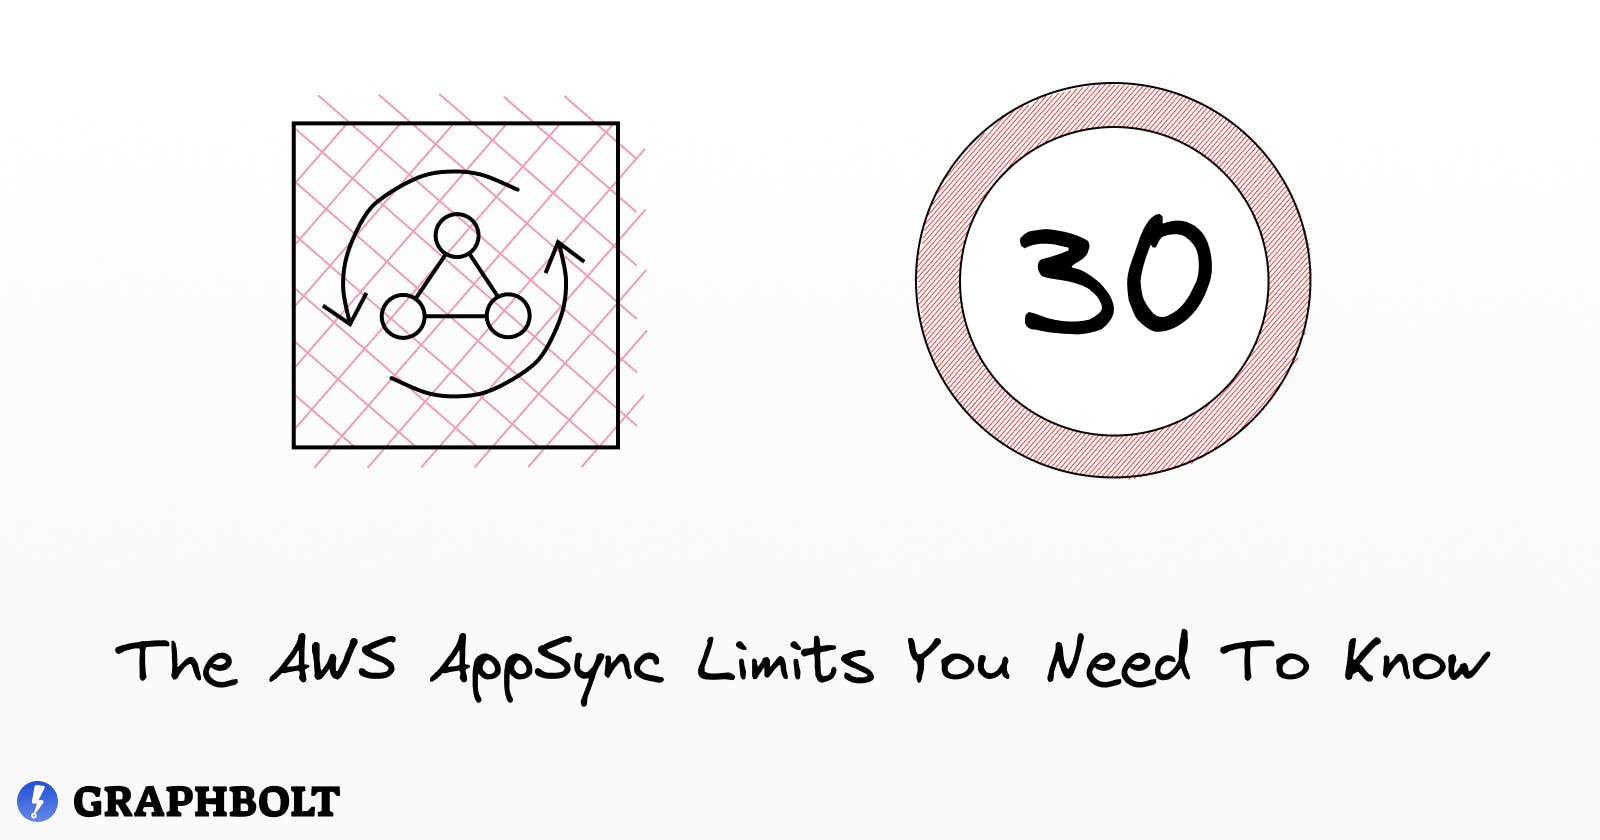 The AWS AppSync Limits You Need To Know